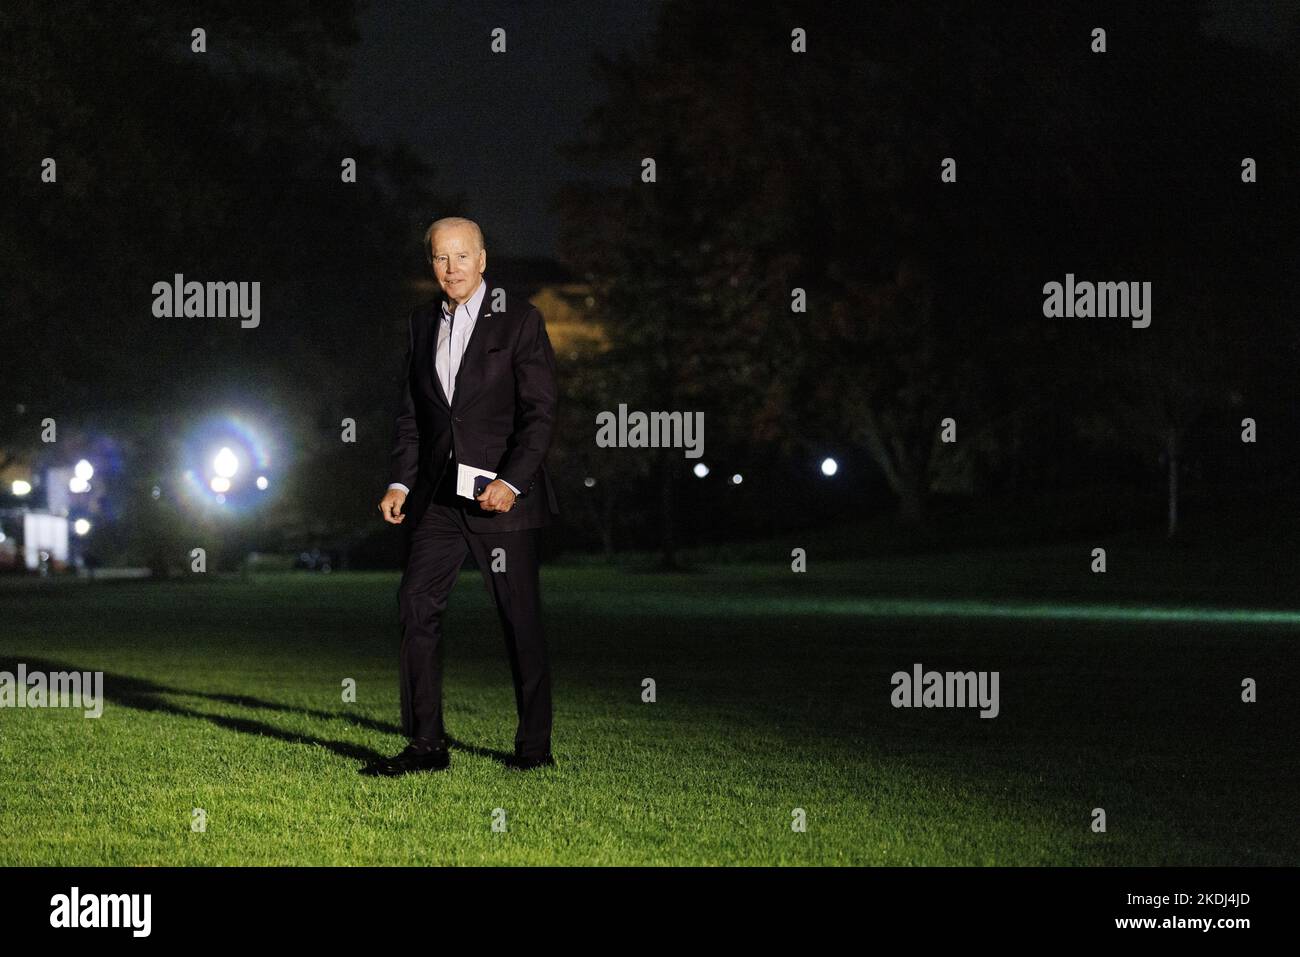 Washington, United States. 06th Nov, 2022. US President Joe Biden walks on the South Lawn of the White House after arriving on Marine One in Washington, DC on Sunday, November 6, 2022. The White House yesterday sought to reframe comments by Biden on closing coal plants as part of a US 'energy transition,' days before midterm elections with Democratic congressional majorities at stake. Photo by Ting Shen/UPI Credit: UPI/Alamy Live News Stock Photo